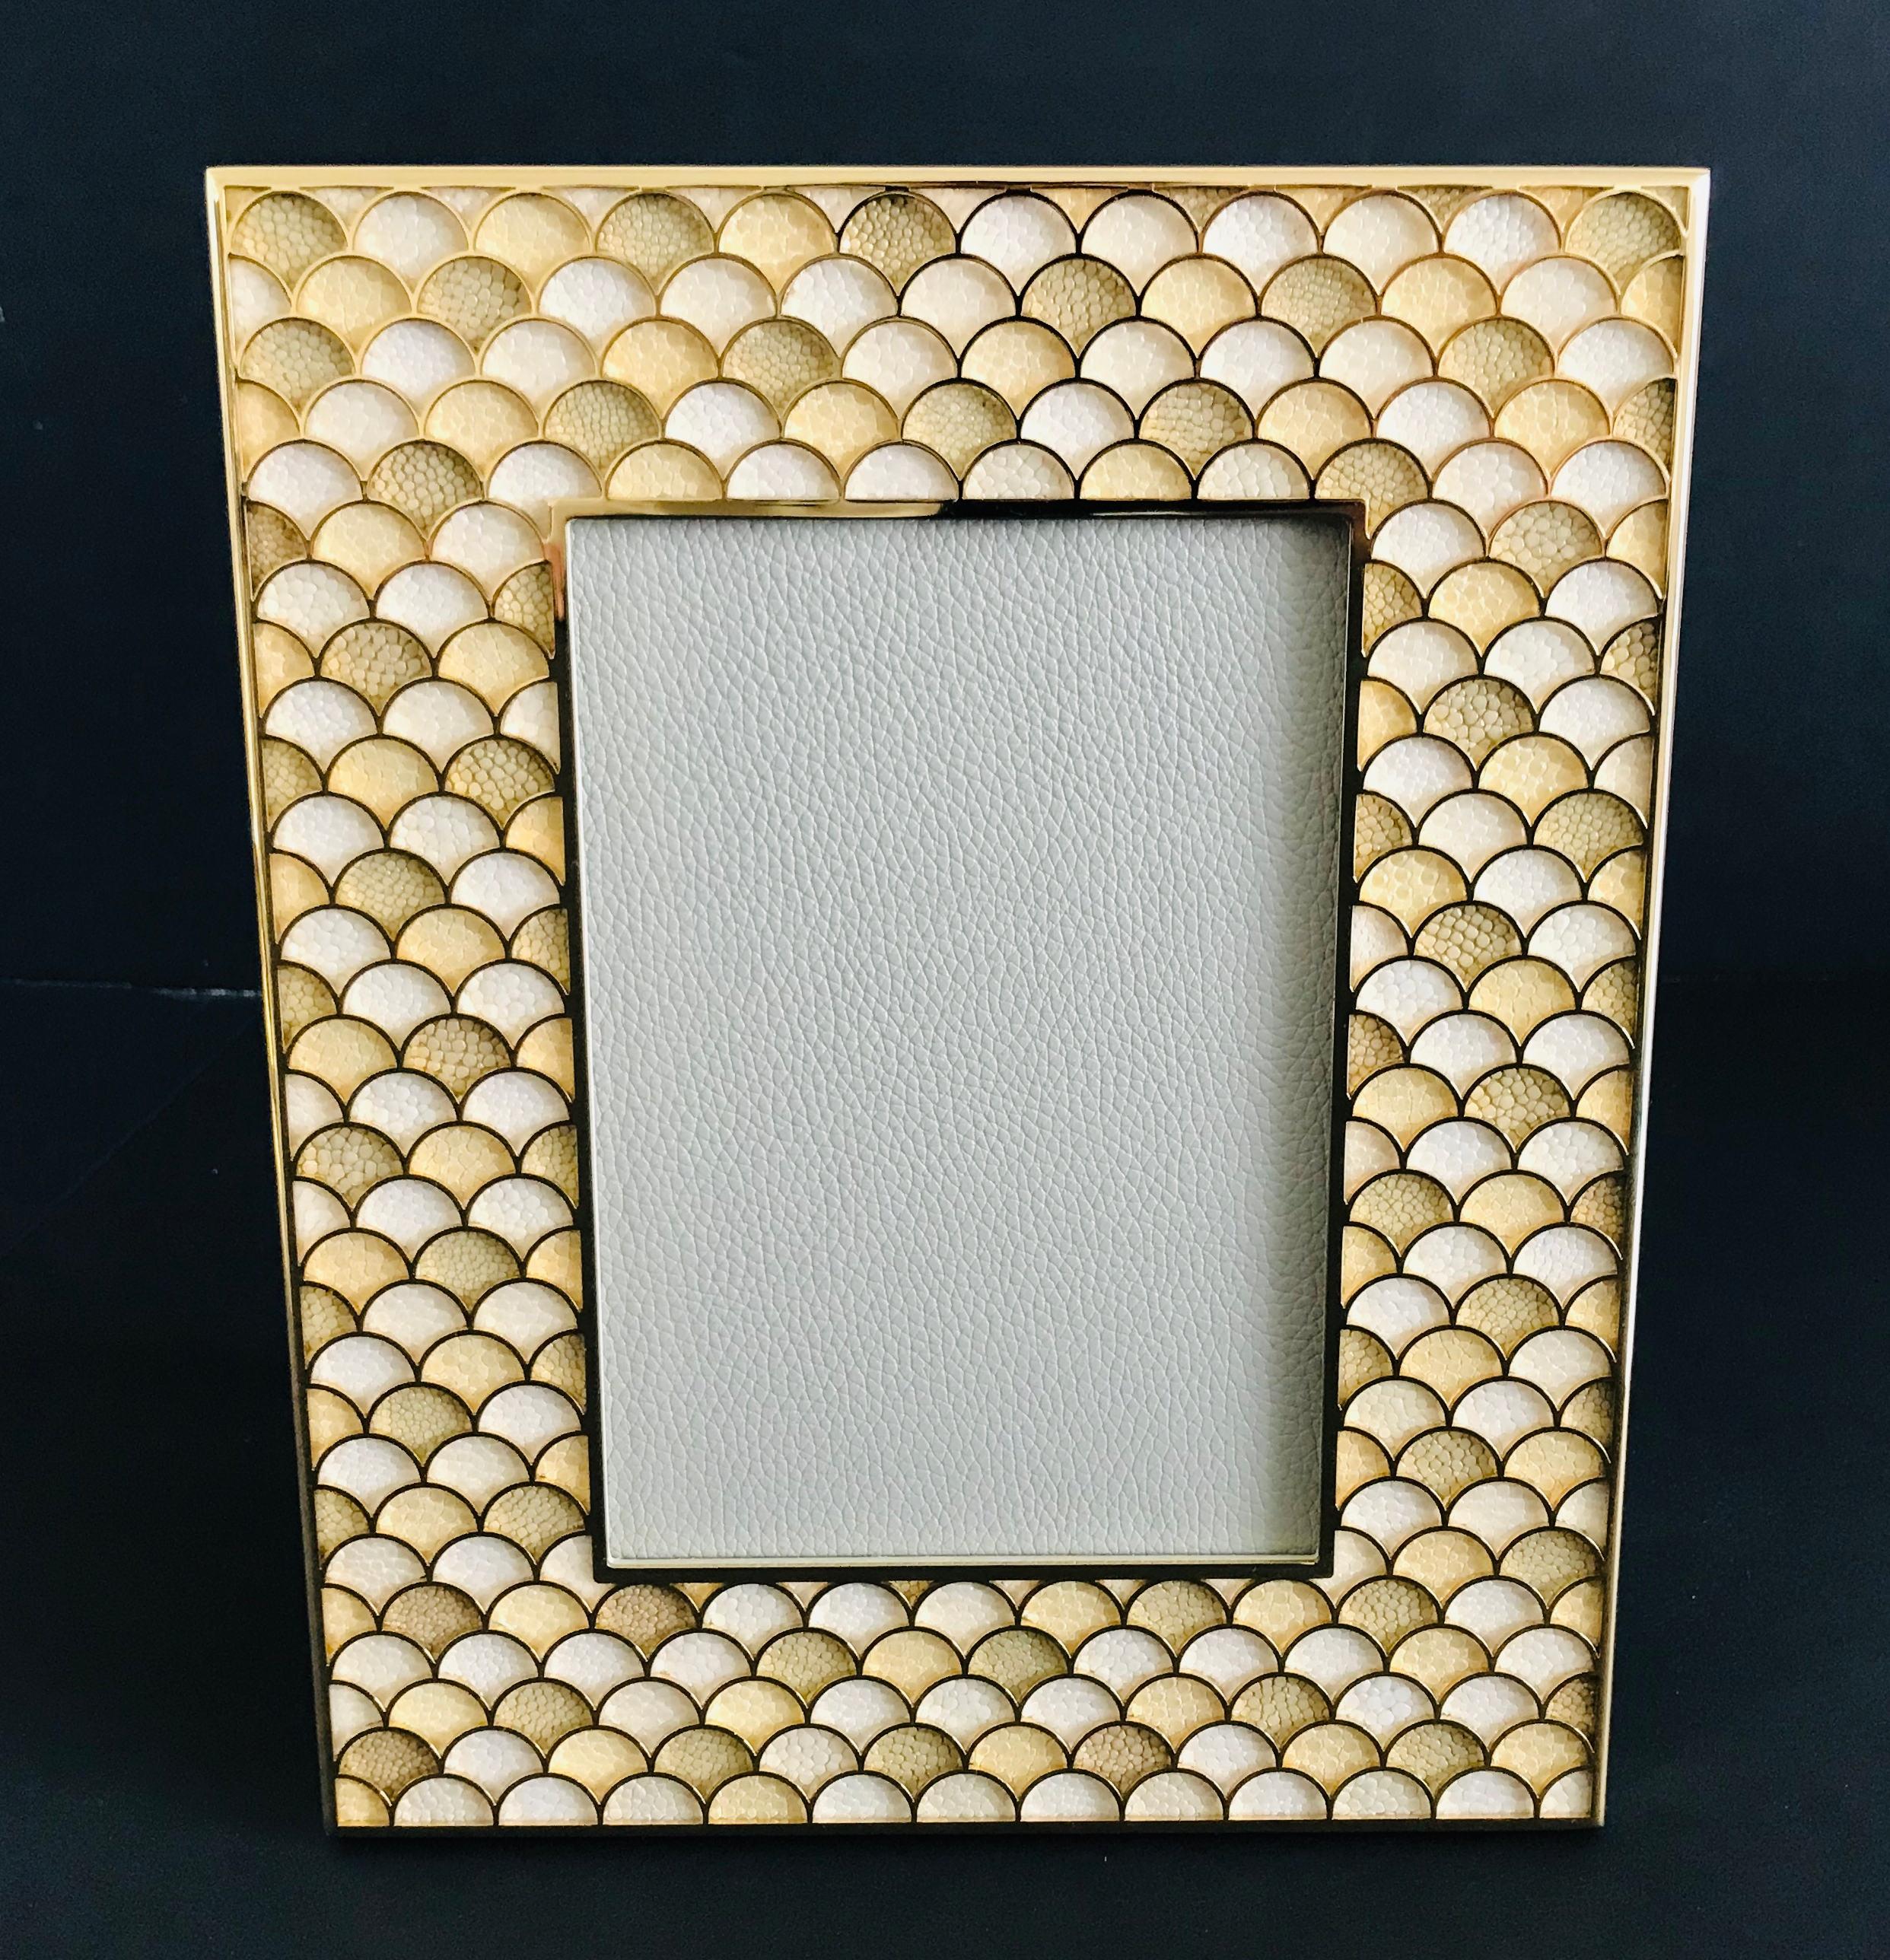 Yellow and ivory shagreen leather and 24 karate gold-plated photo frame by Fabio Ltd
Height: 10.5 inches / Width: 8.5 inches / Depth: 1 inch
Photo size: 5 inches by 7 inches
LAST 1 in stock in Los Angeles
Order Reference #: FABIOLTD PF23
This piece